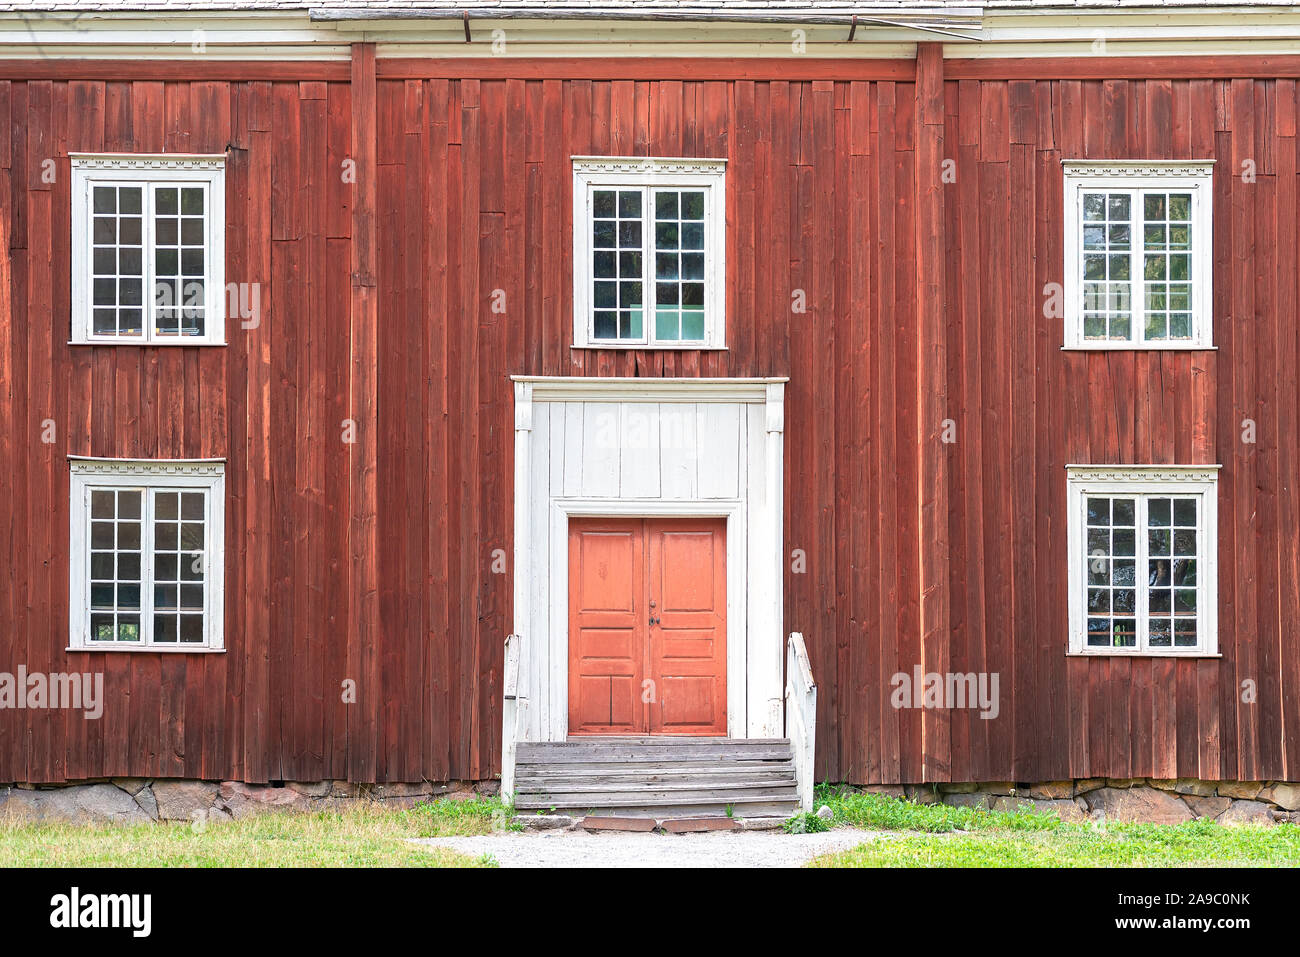 Close up of square white windows and door in old red wooden barn ...